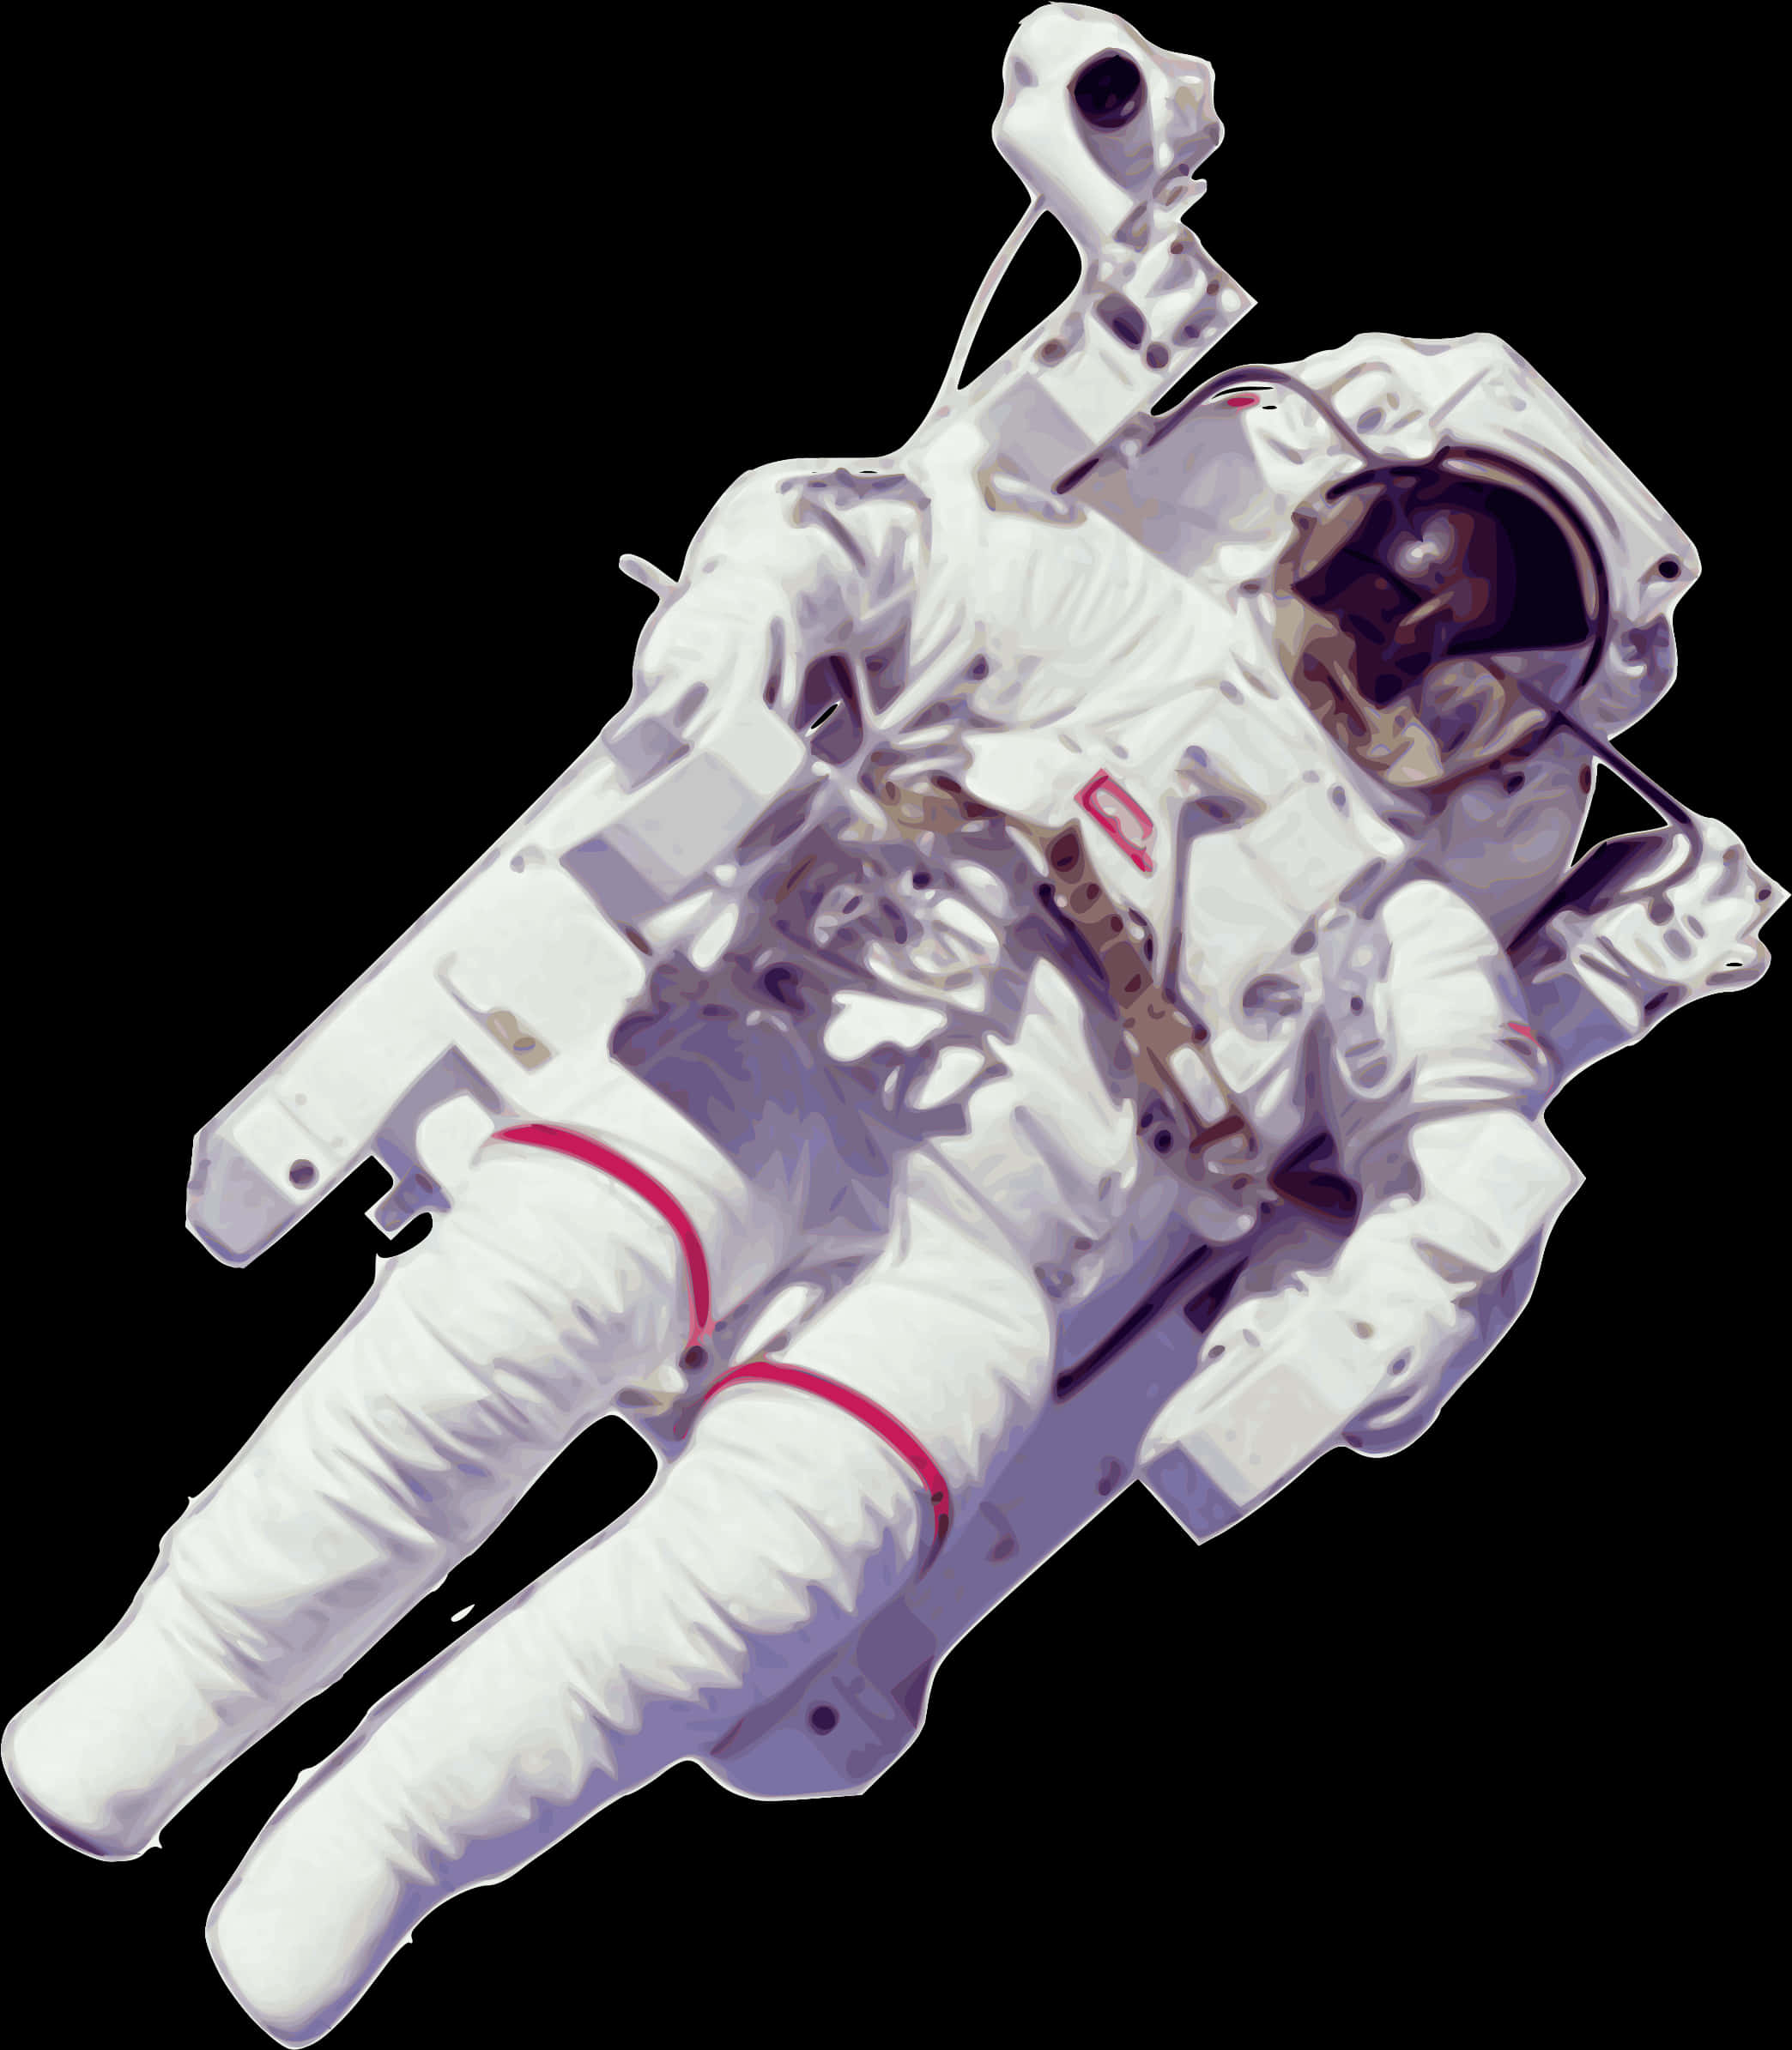 An Astronaut In Space Suit